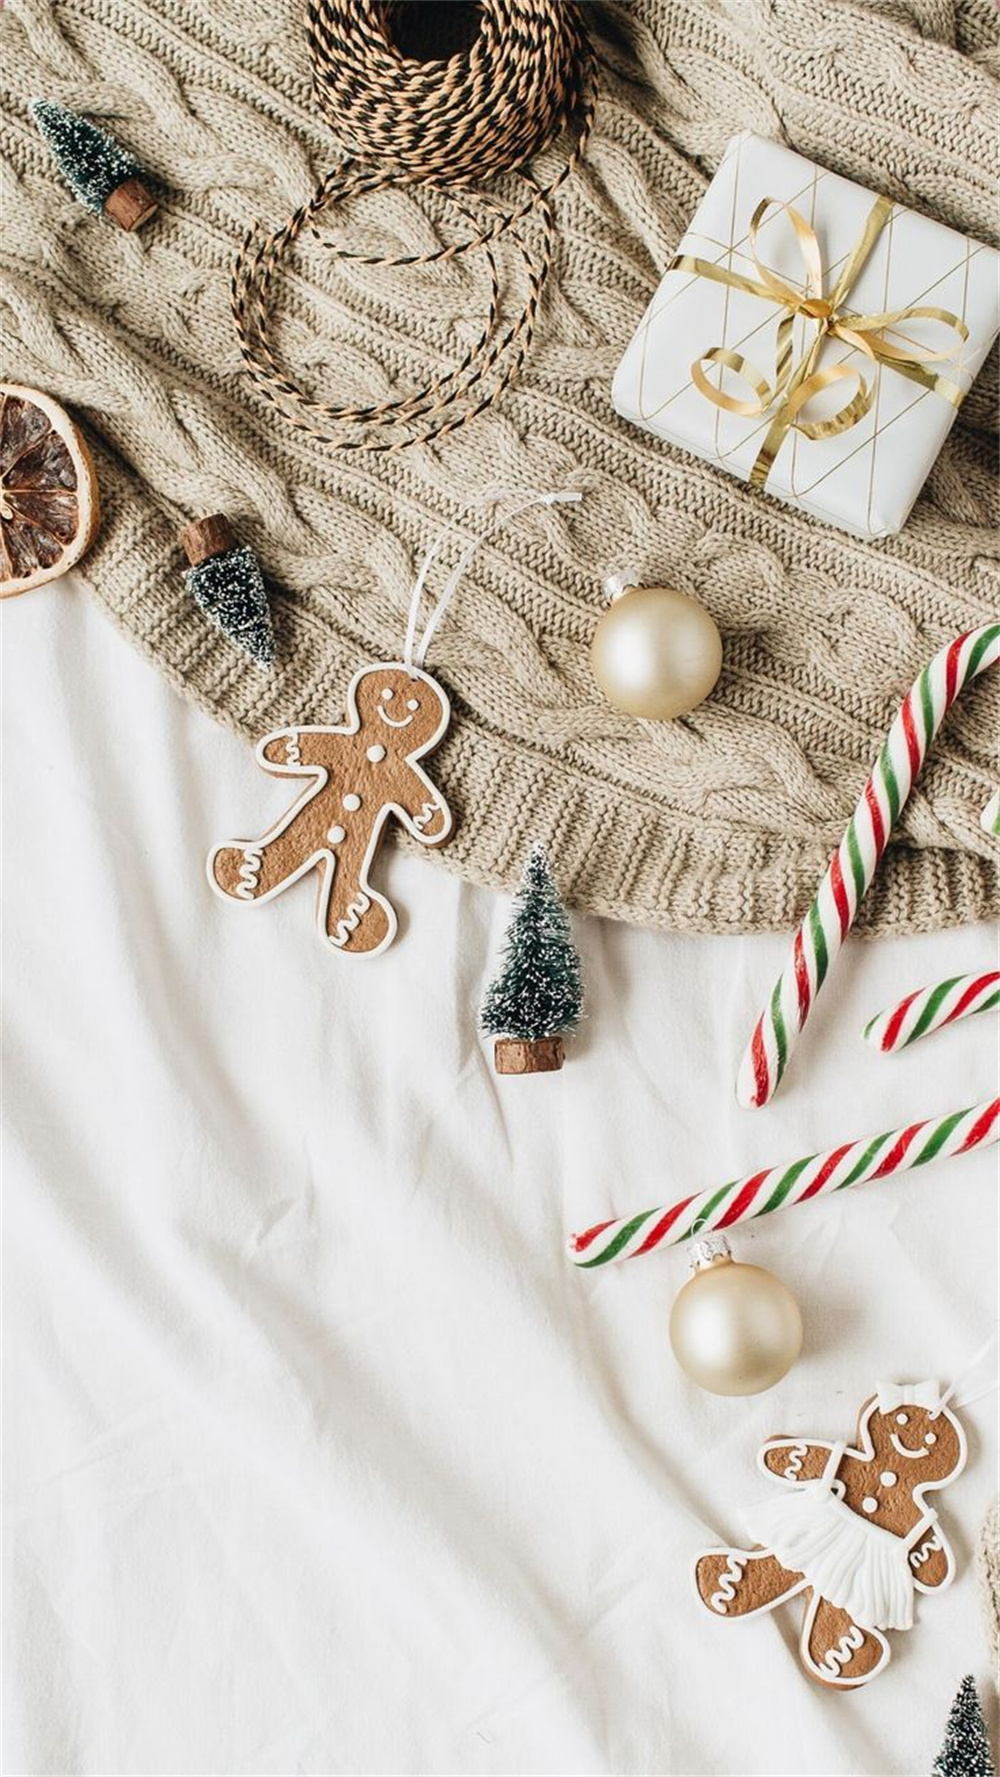 Aesthetic Christmas iPhone Wallpaper Ideas with Ginger Biscuits